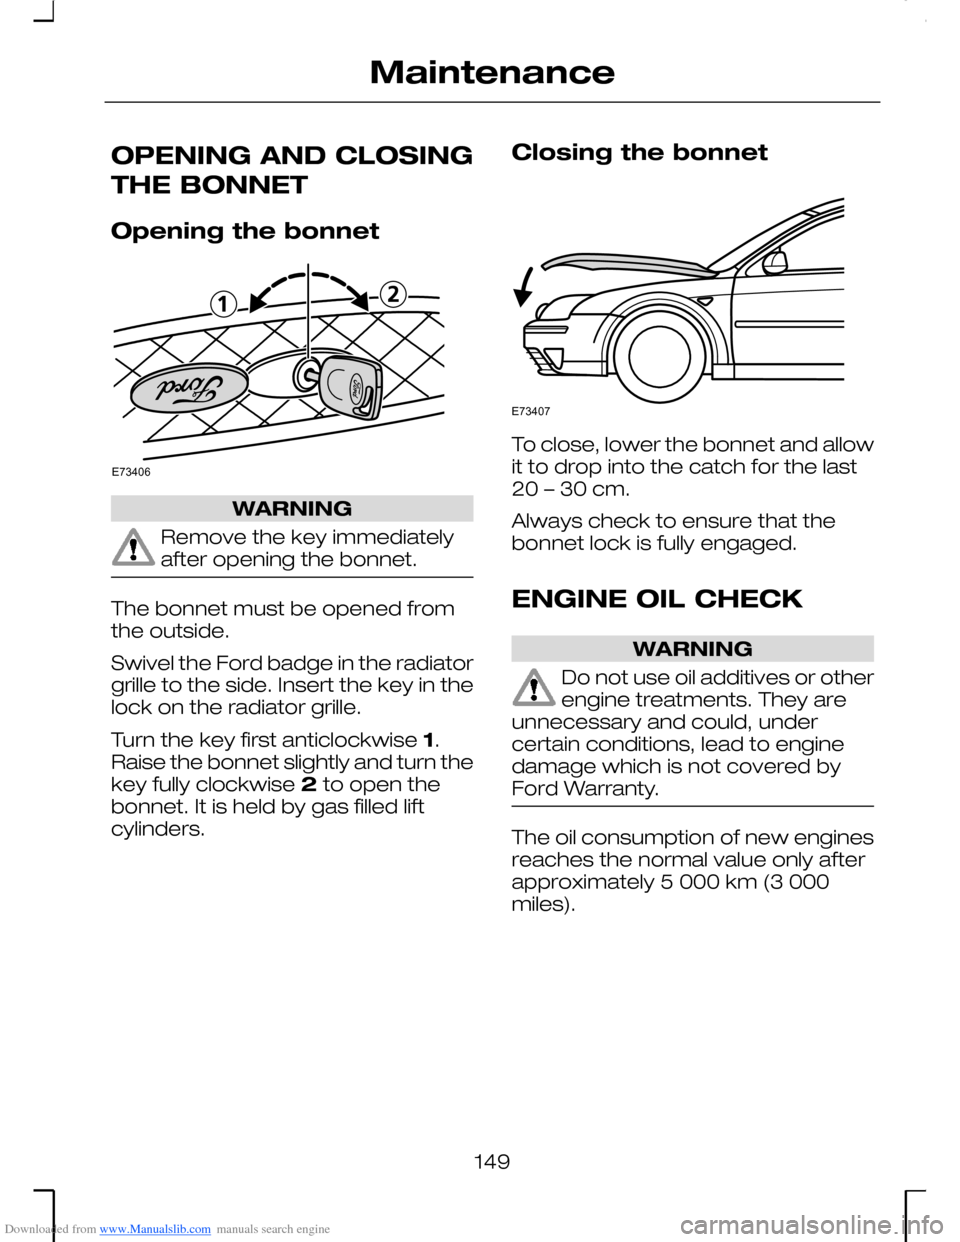 FORD MONDEO 2006 2.G Owners Manual Downloaded from www.Manualslib.com manuals search engine OPENING AND CLOSING
THE BONNET
Opening the bonnet
WARNING
Remove the key immediatelyafter opening the bonnet.
The bonnet must be opened fromthe